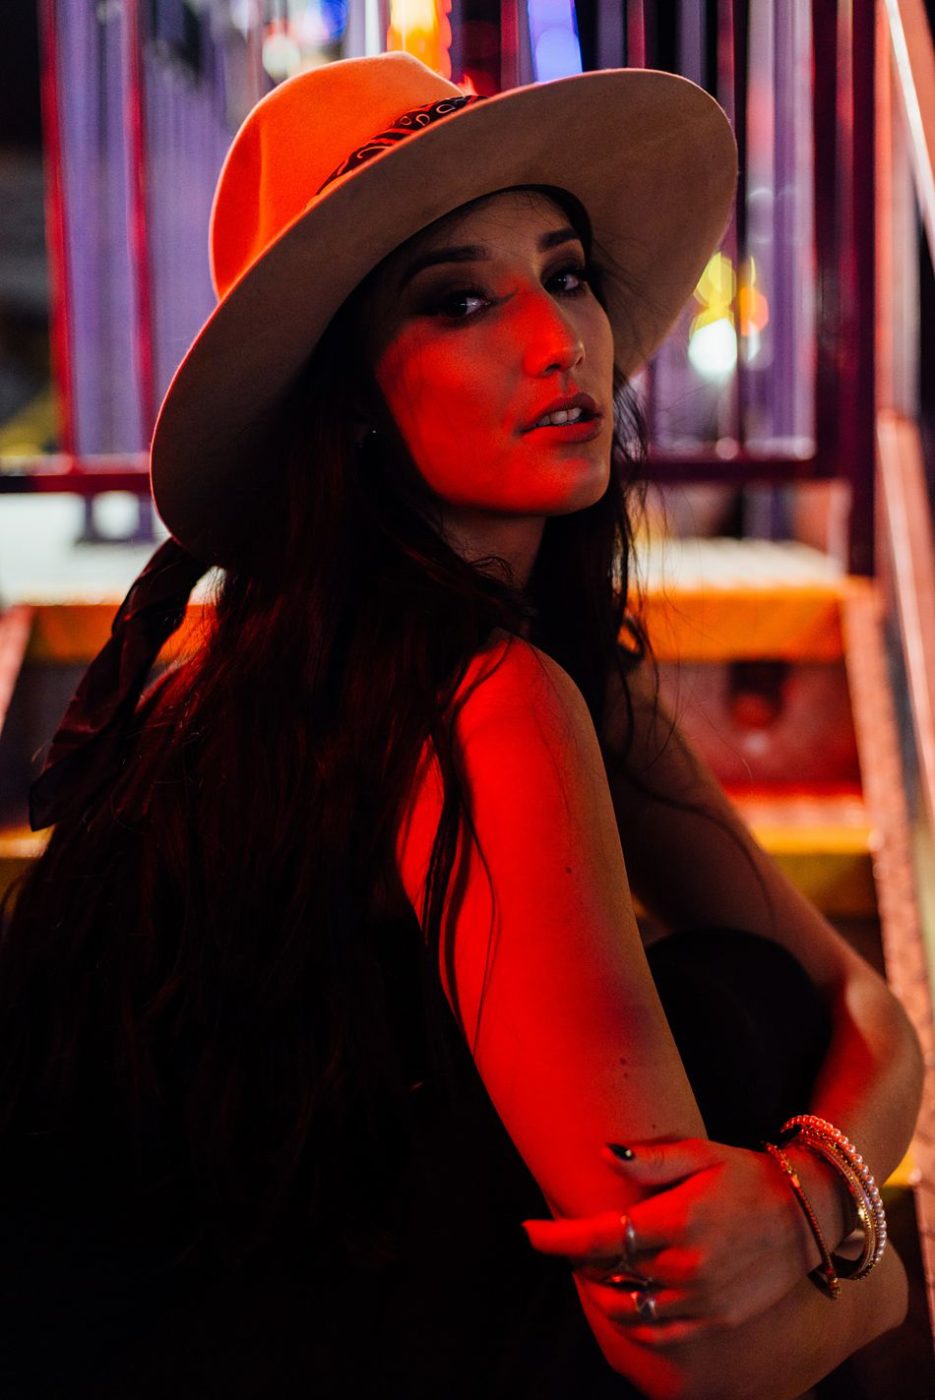 Stylish girl with long dark hair in trendy hat poses with arms crossed